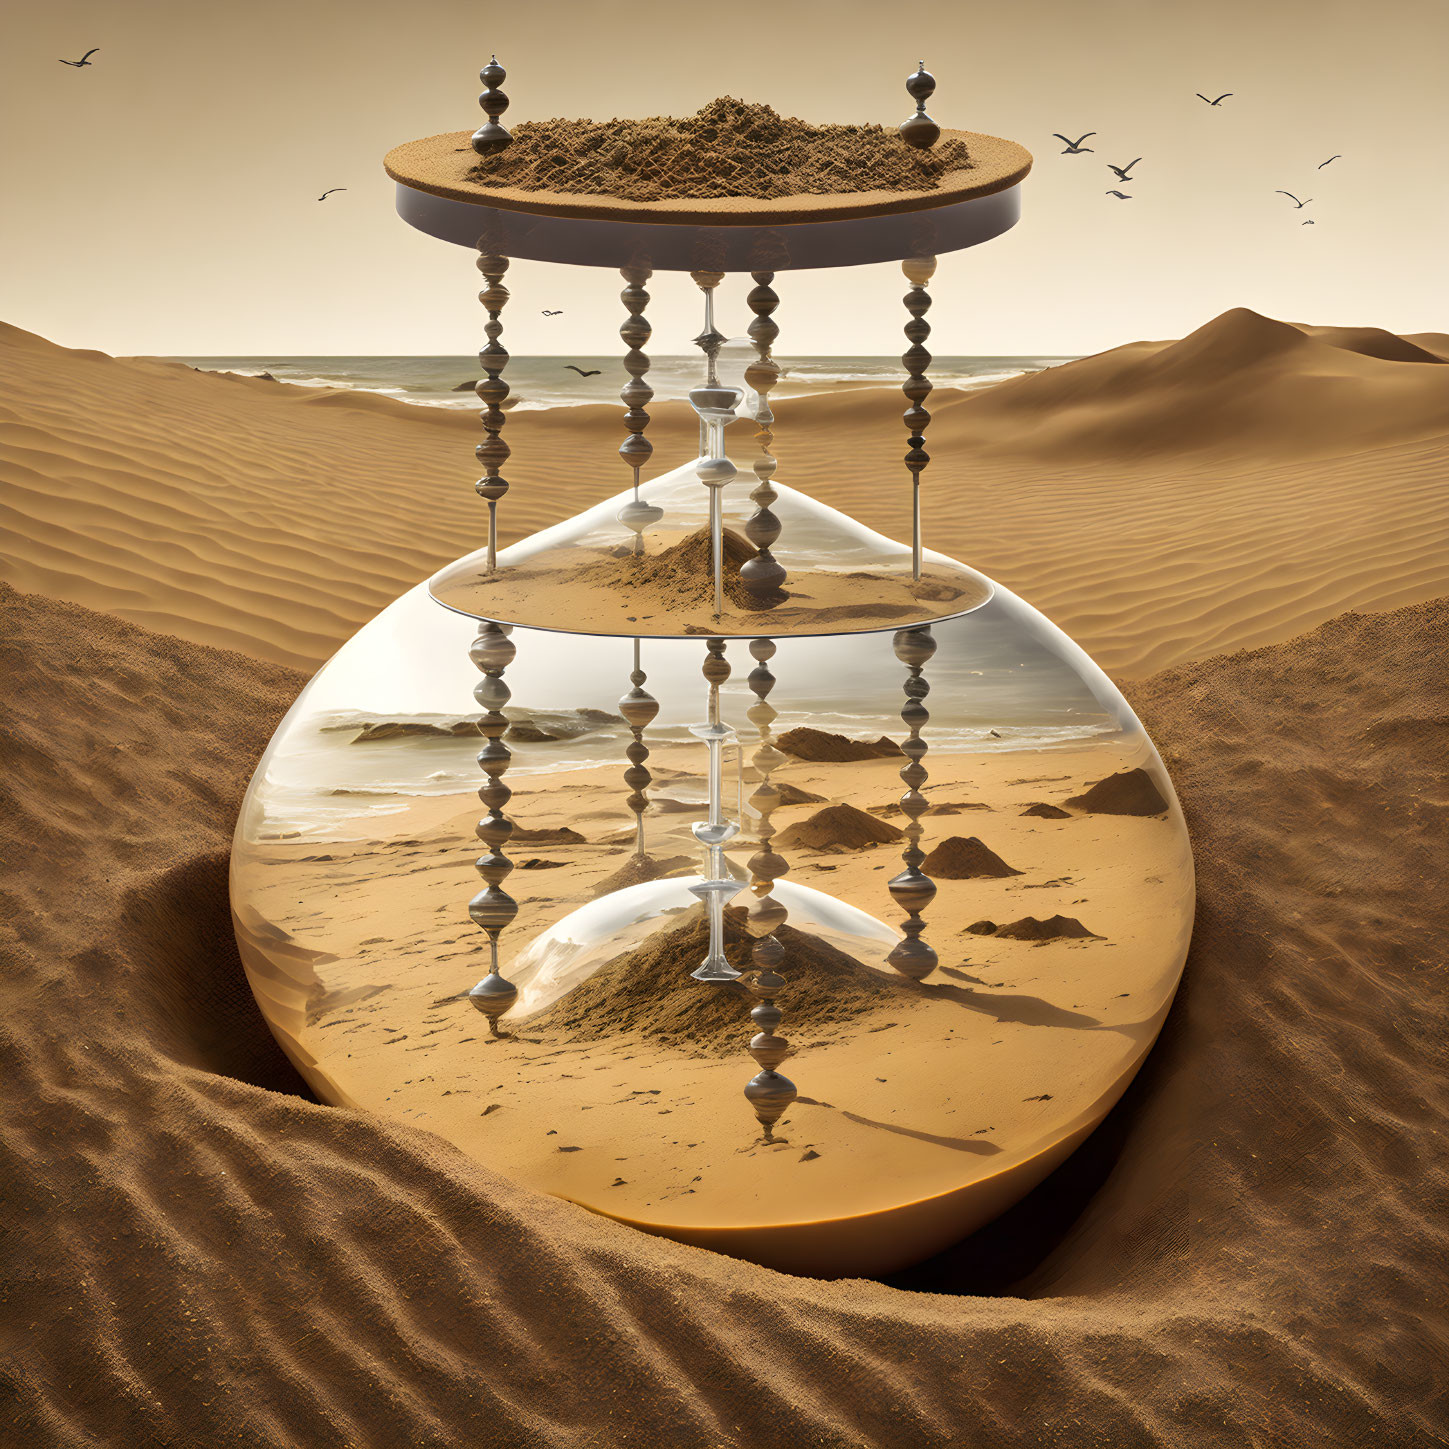 The Surreal Sand Clock